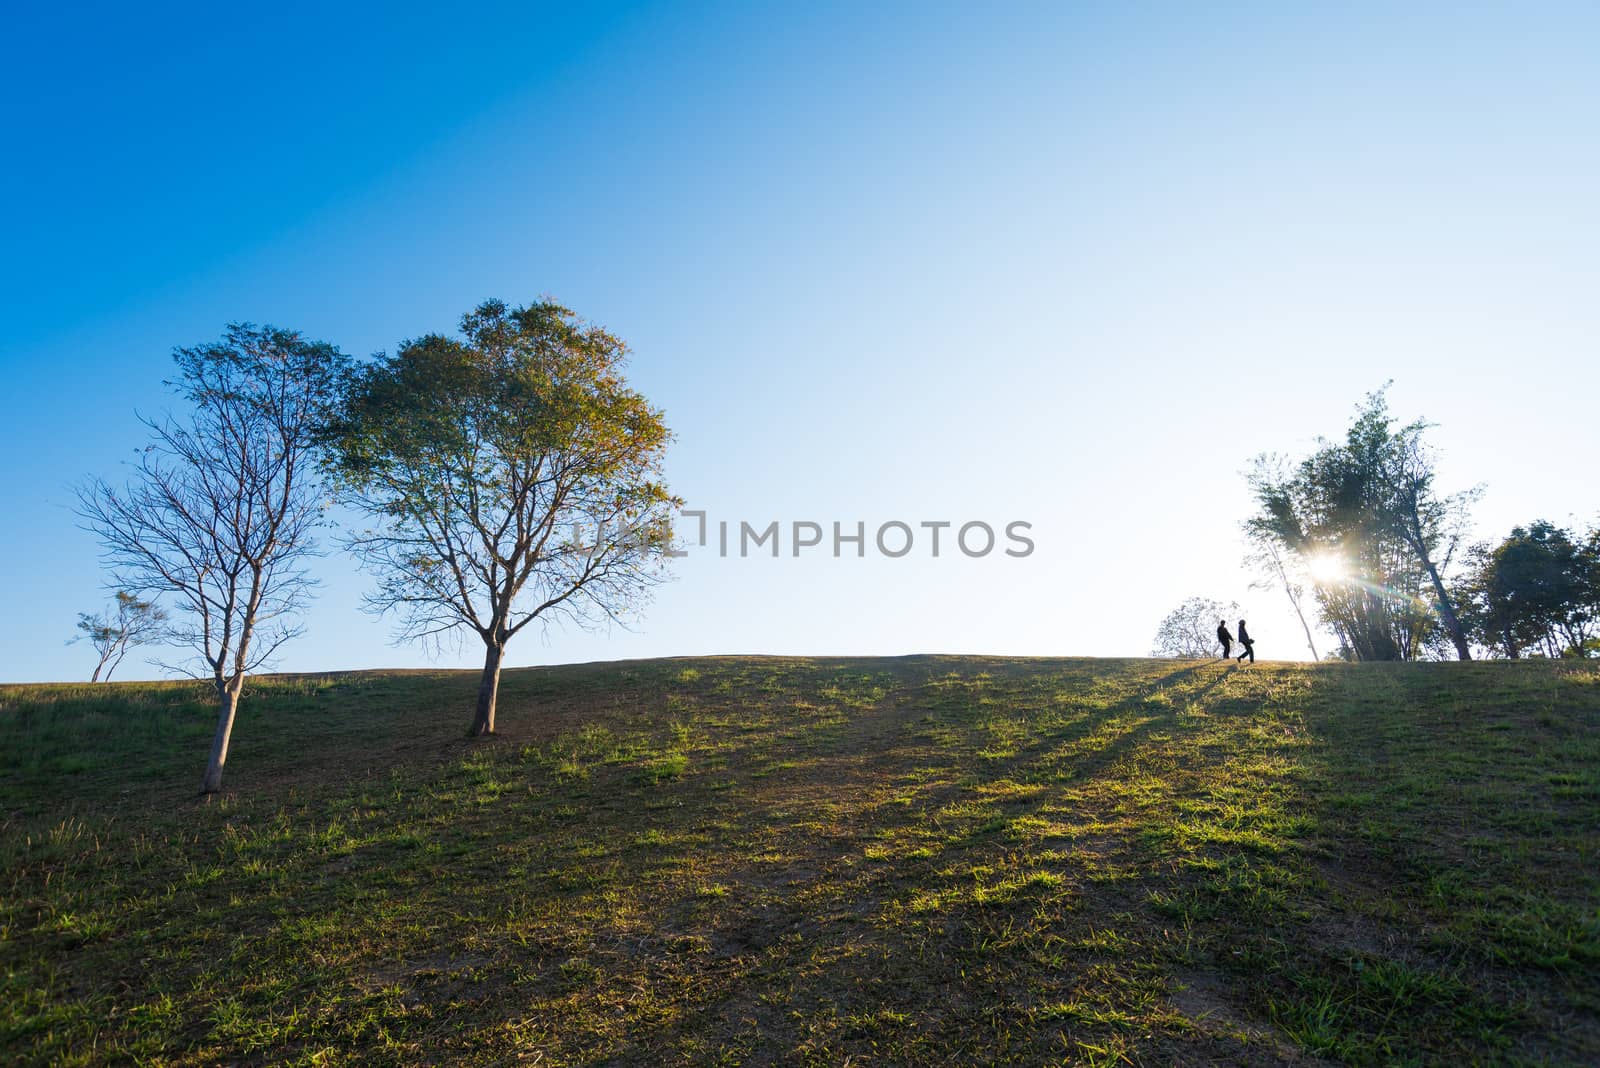 silhouette of people on hill by moggara12